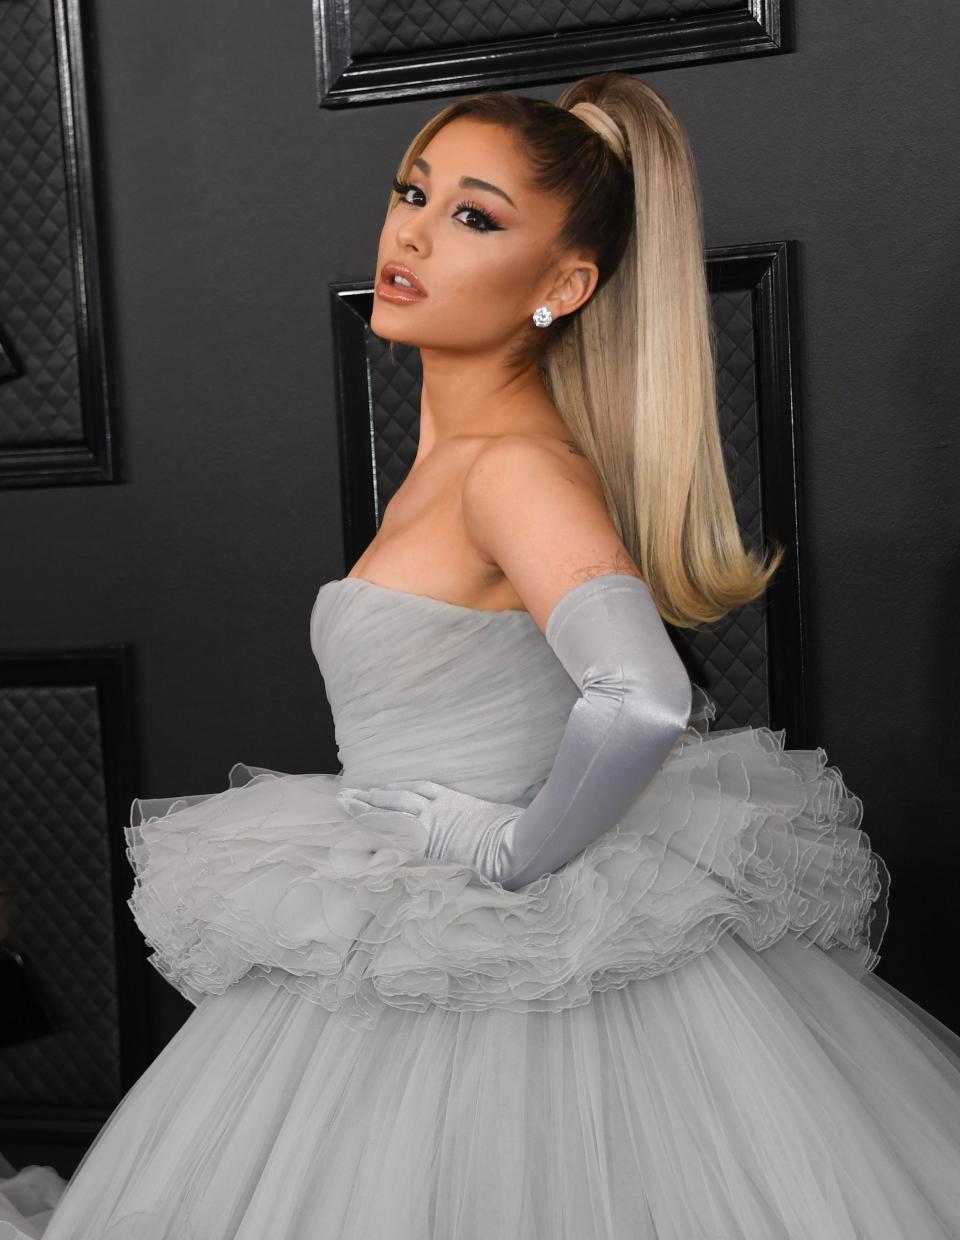 Ariana Grande attends the 2020 Grammy Awards in Los Angeles.